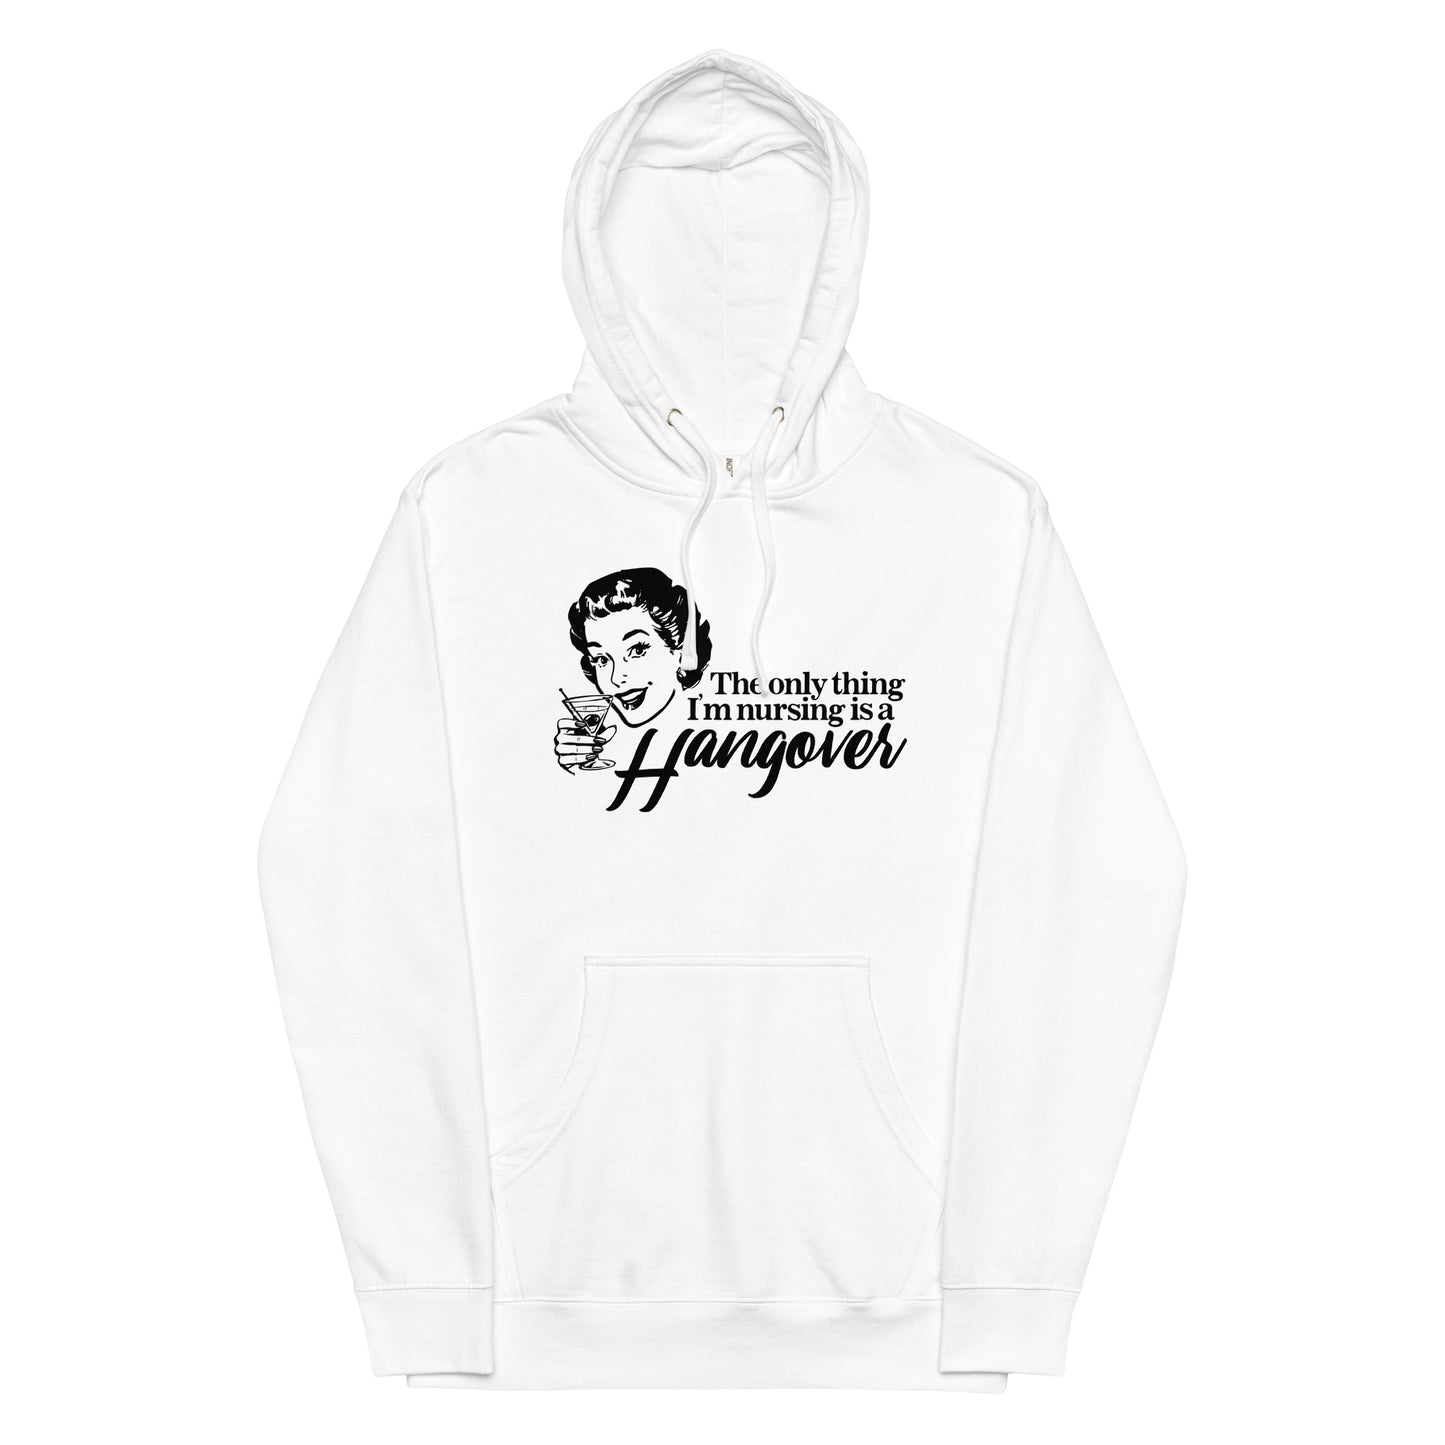 The Only Thing I'm Nursing is a Hangover Unisex hoodie